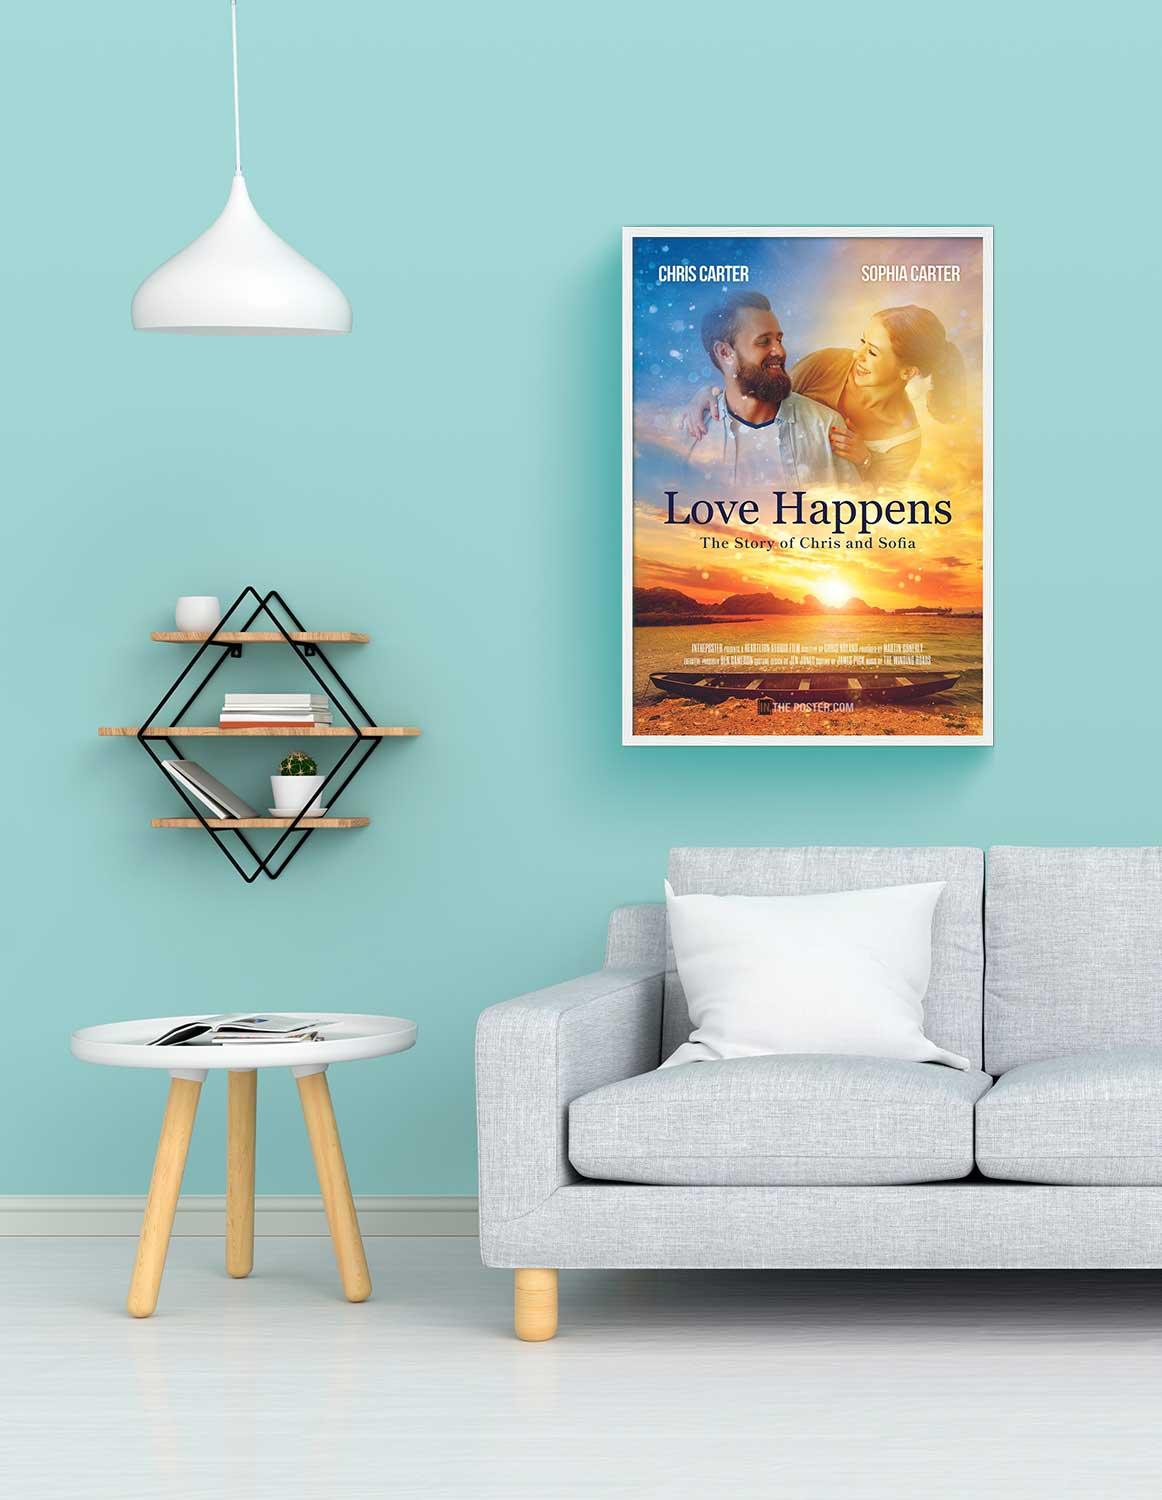 A romantic movie poster in a regular size white frame above a grey sofa